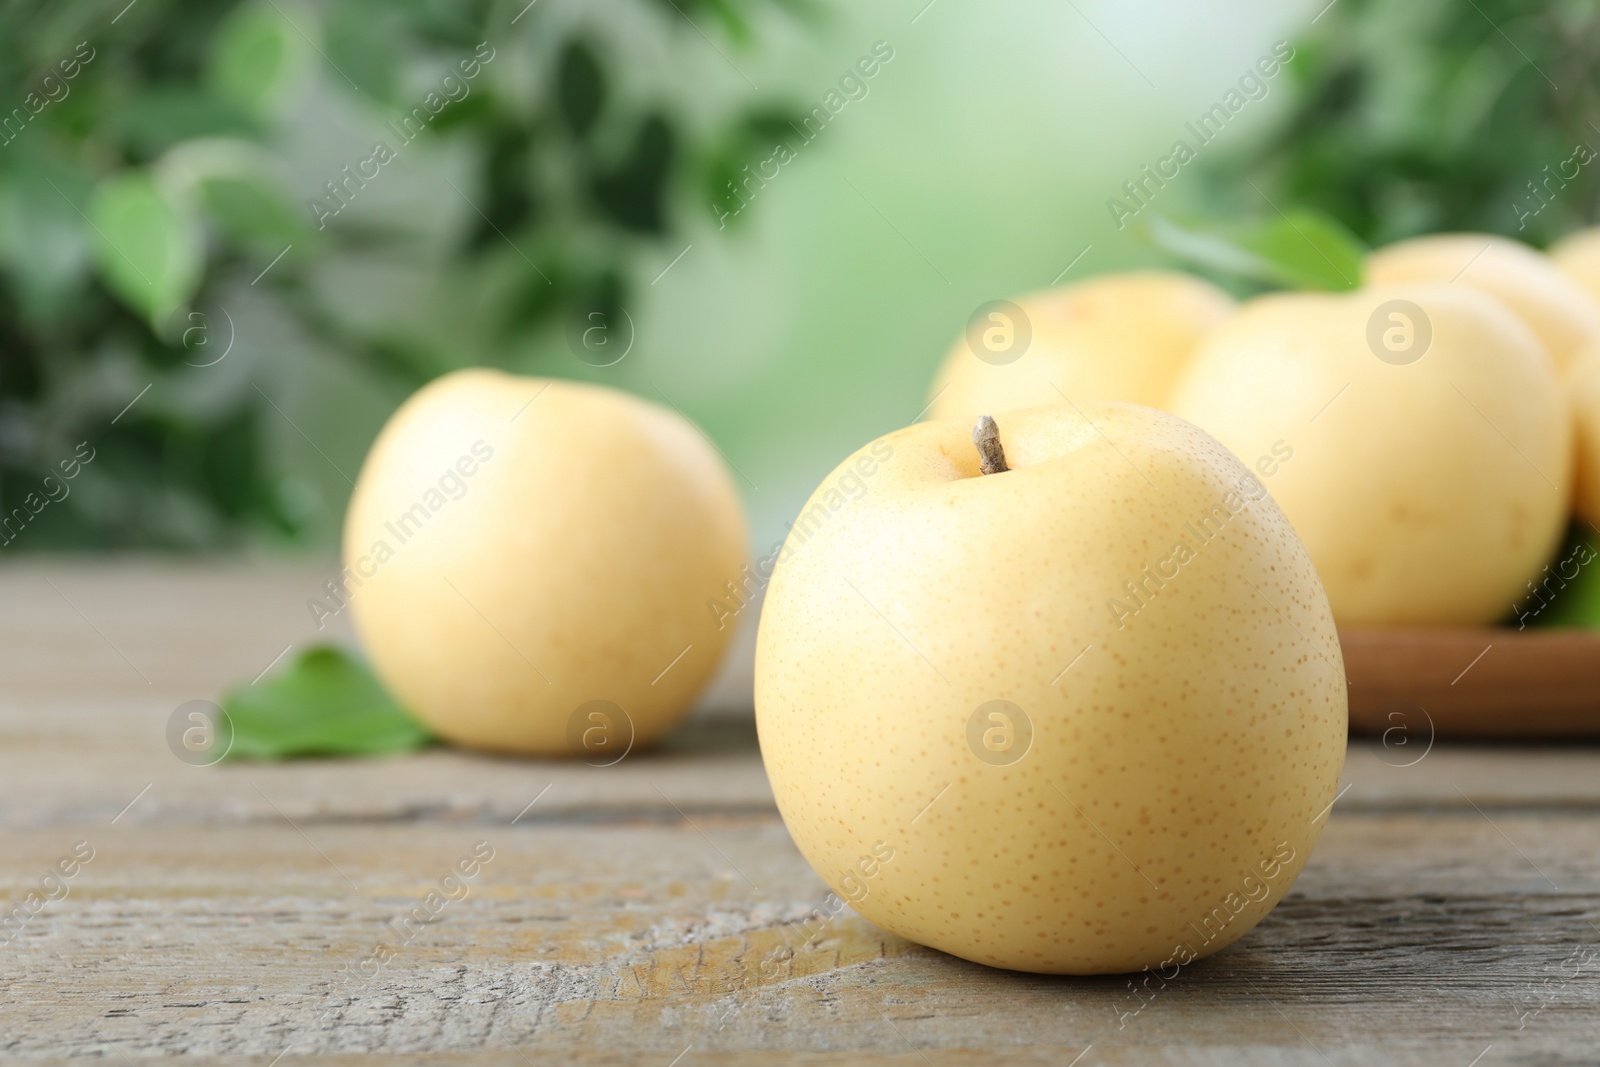 Photo of Ripe apple pears on wooden table against blurred background. Space for text